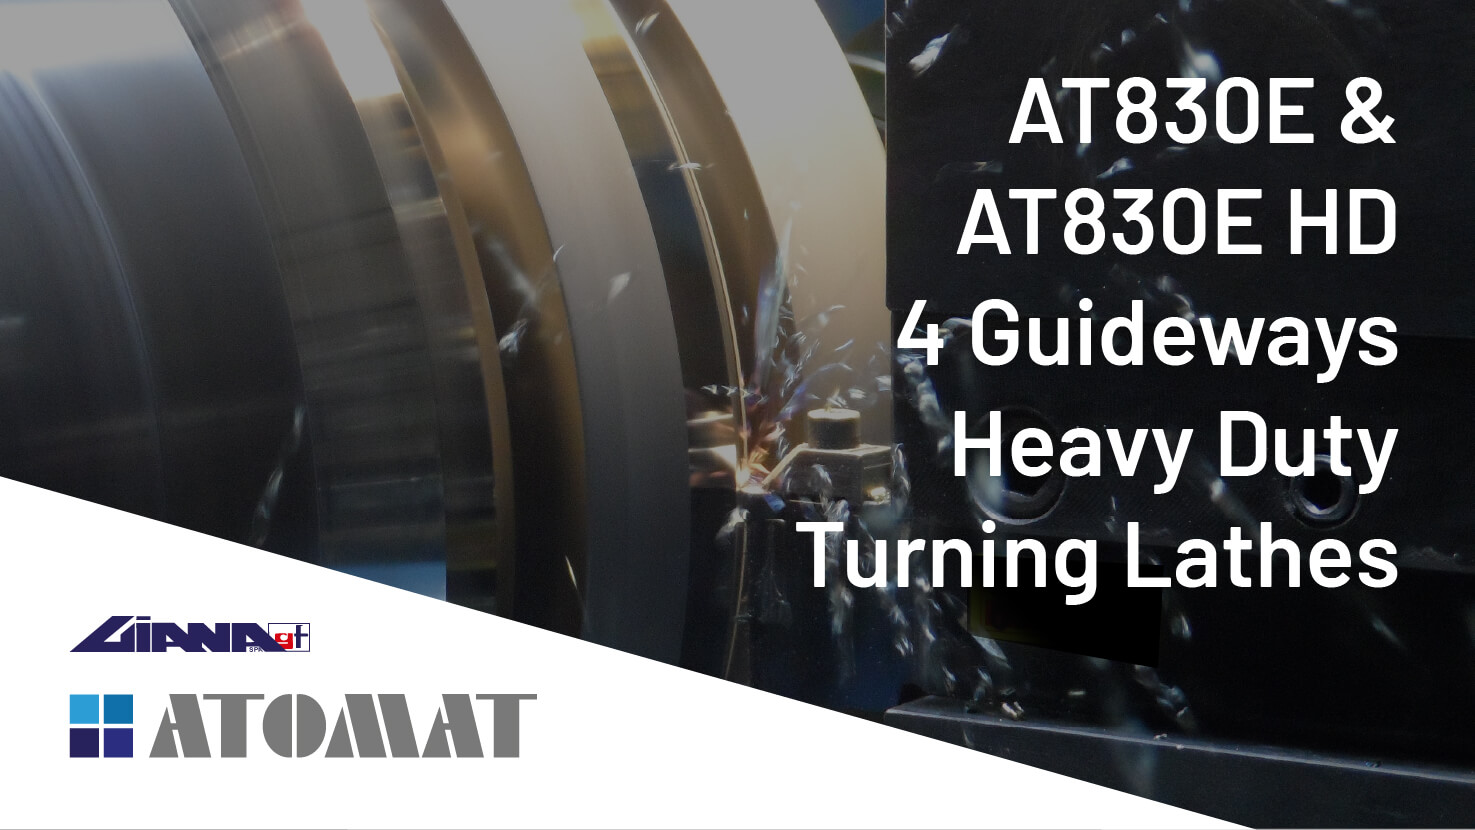 Atomat AT830E & AT830E HD 4 Guideways Heavy Duty Turning Lathes